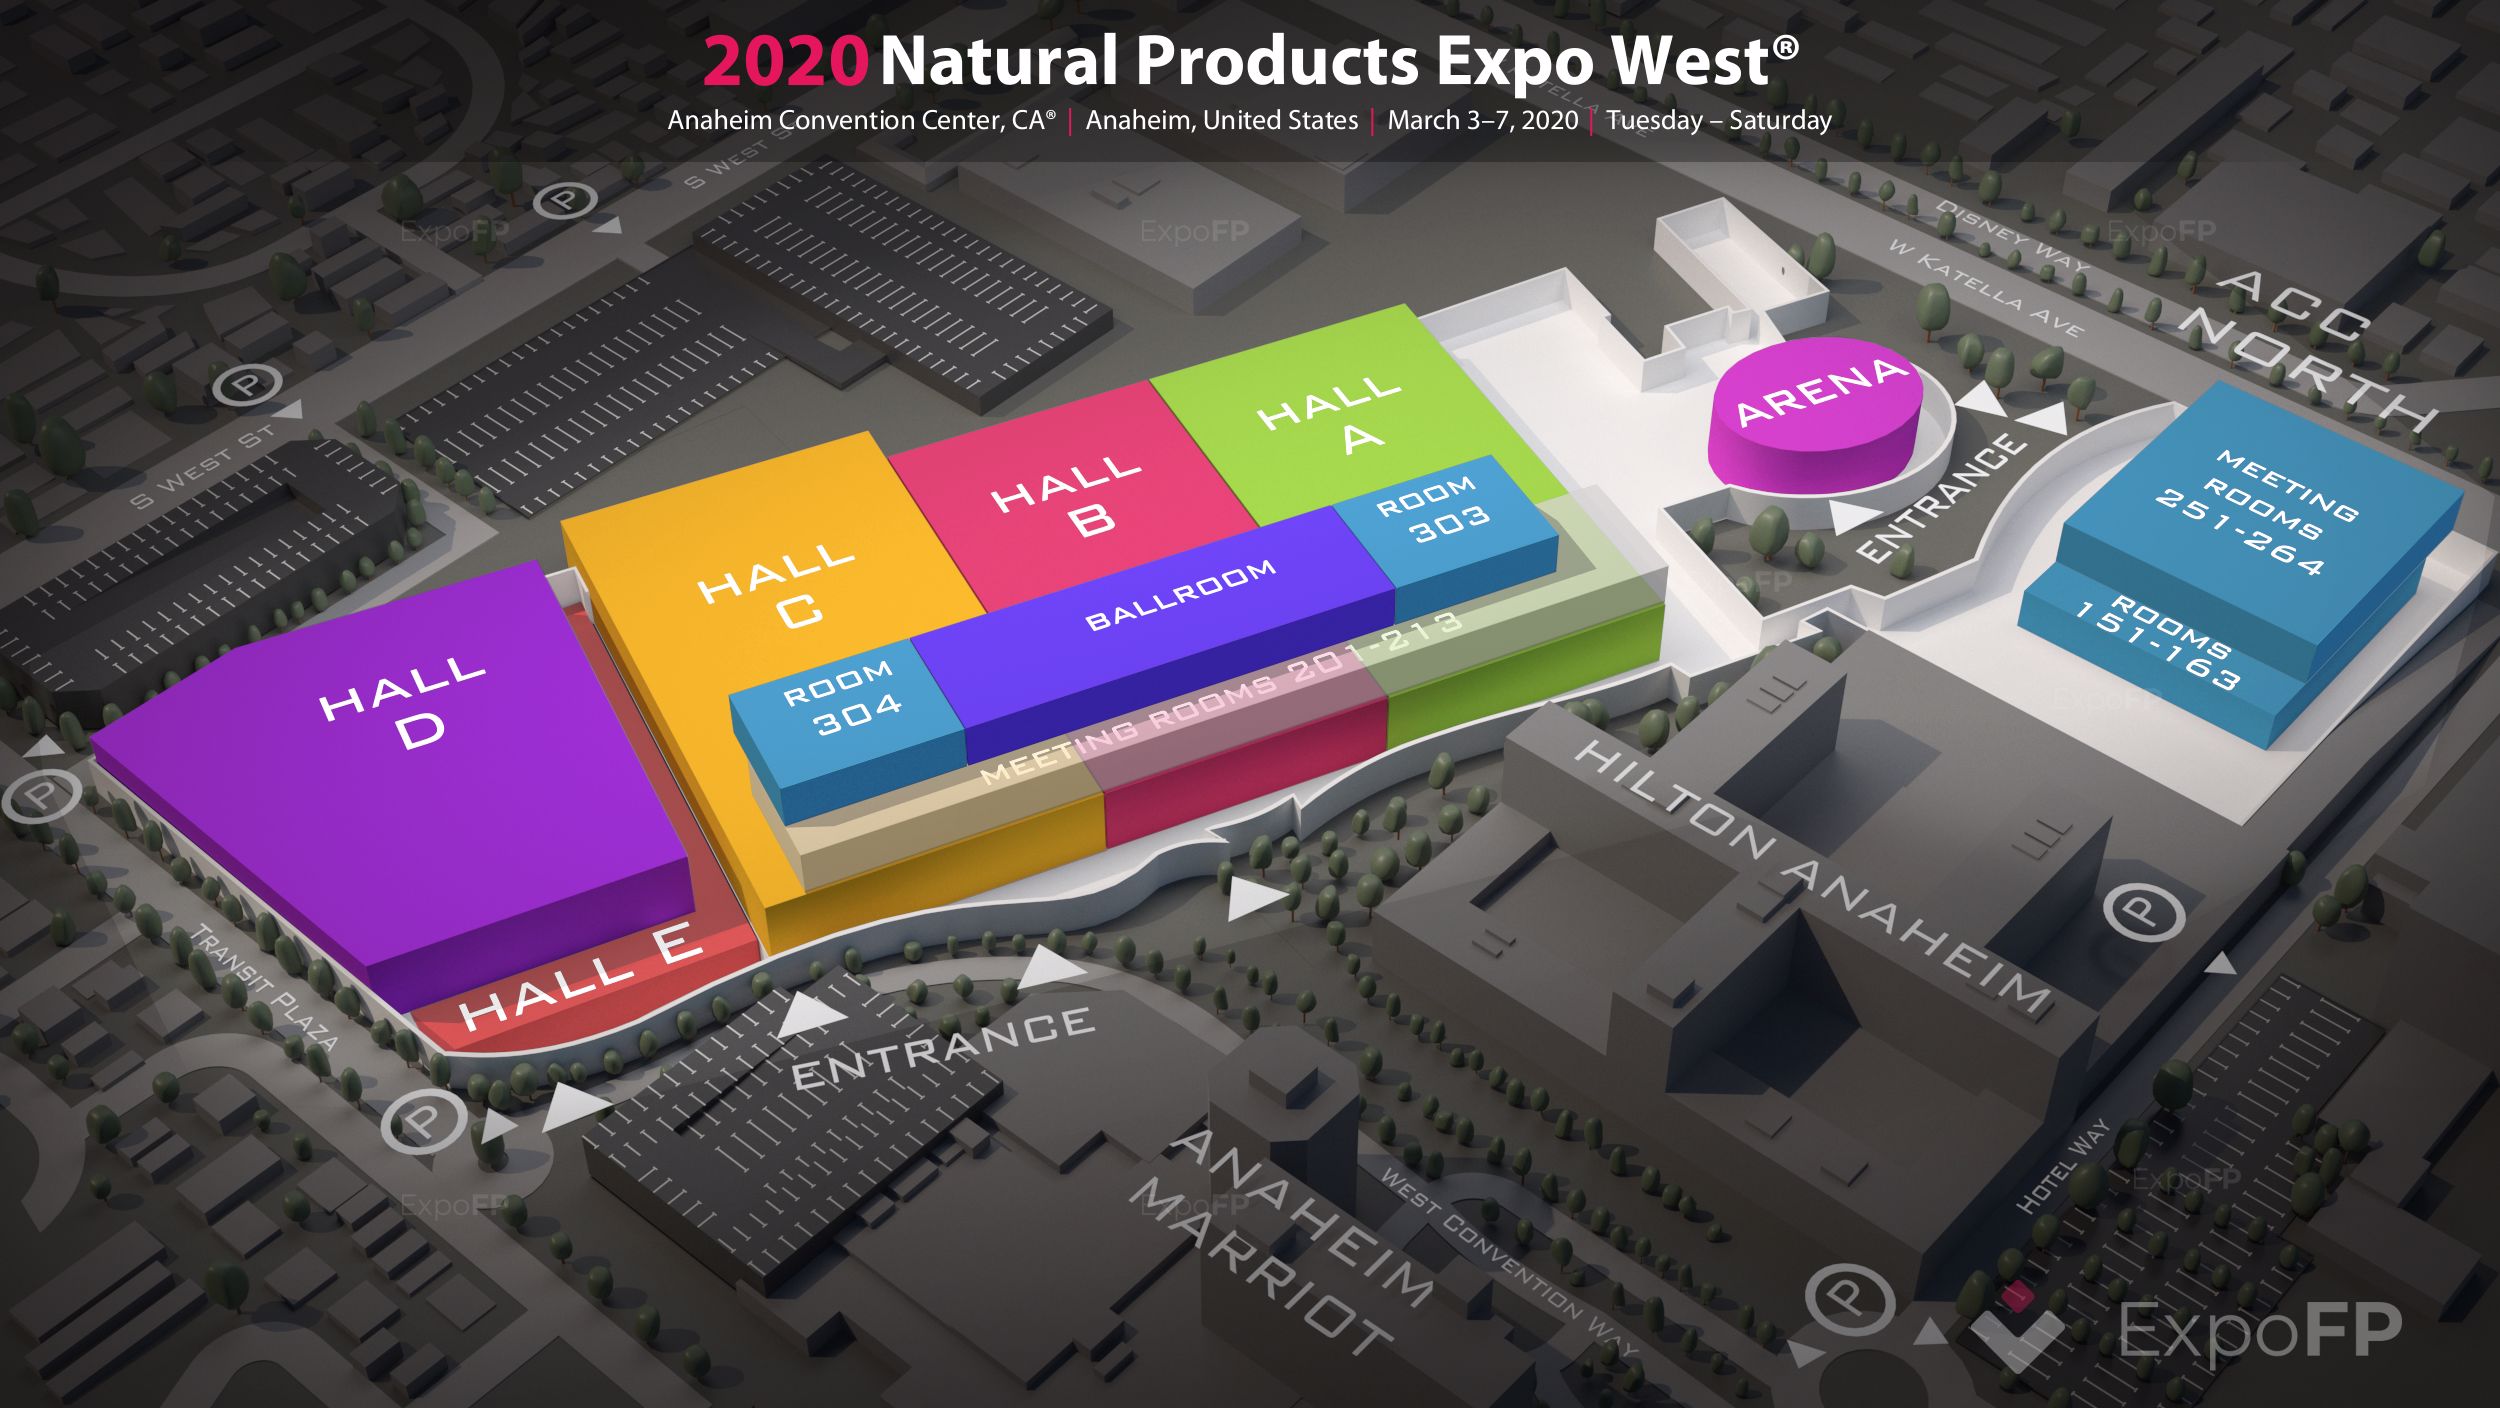 Natural Products Expo West 2020 in Anaheim Convention